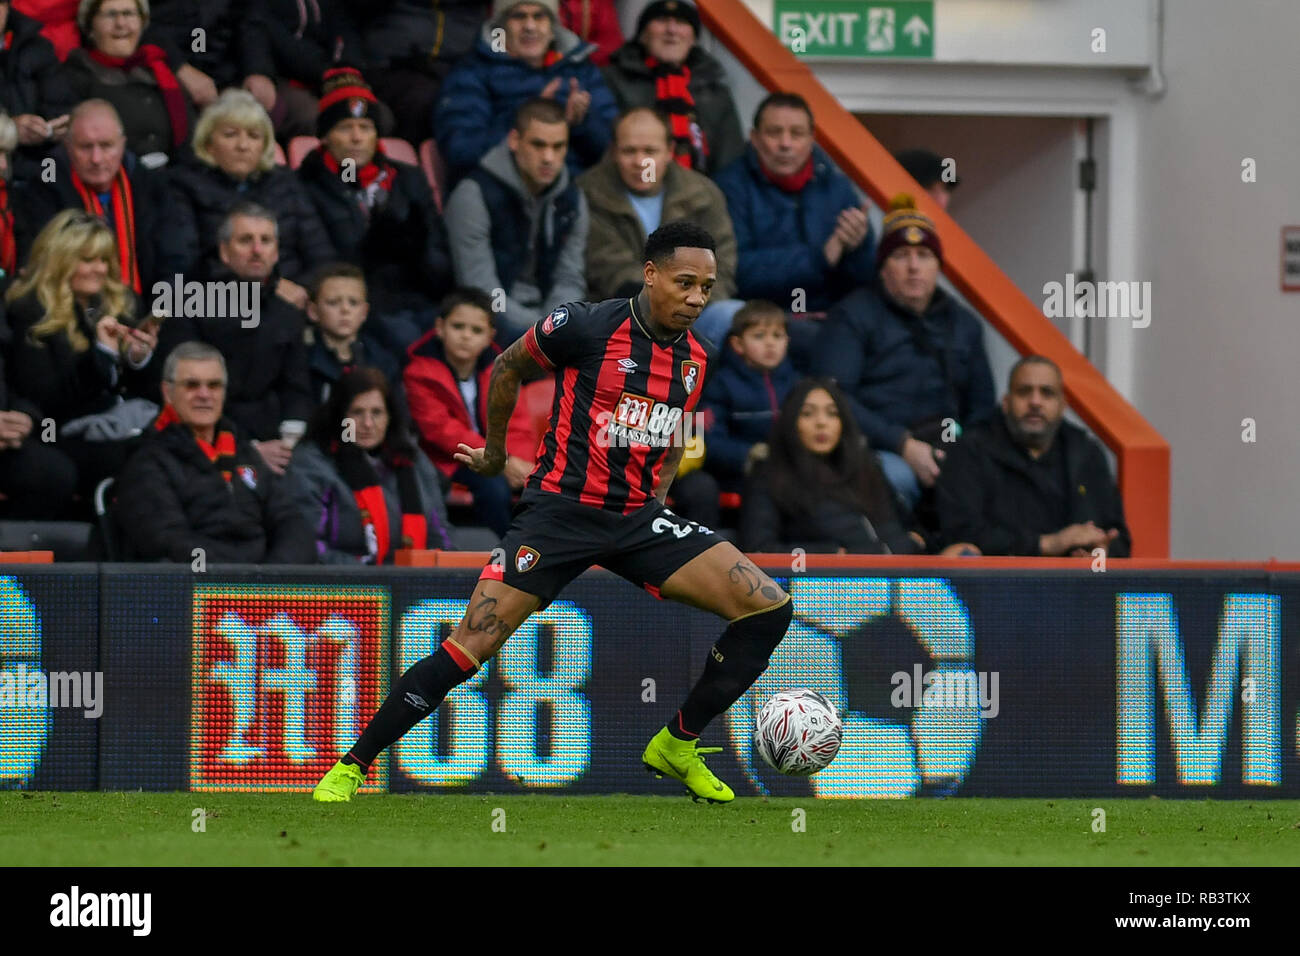 5th January 2019, Dean Court, Bournemouth, England; The Emirates FA Cup, 3rd Round, Bournemouth vs Brighton ; New signing Nathan Clyne (23) of bournemouth runs with the ball  Credit: Phil Westlake/News Images   English Football League images are subject to DataCo Licence Stock Photo